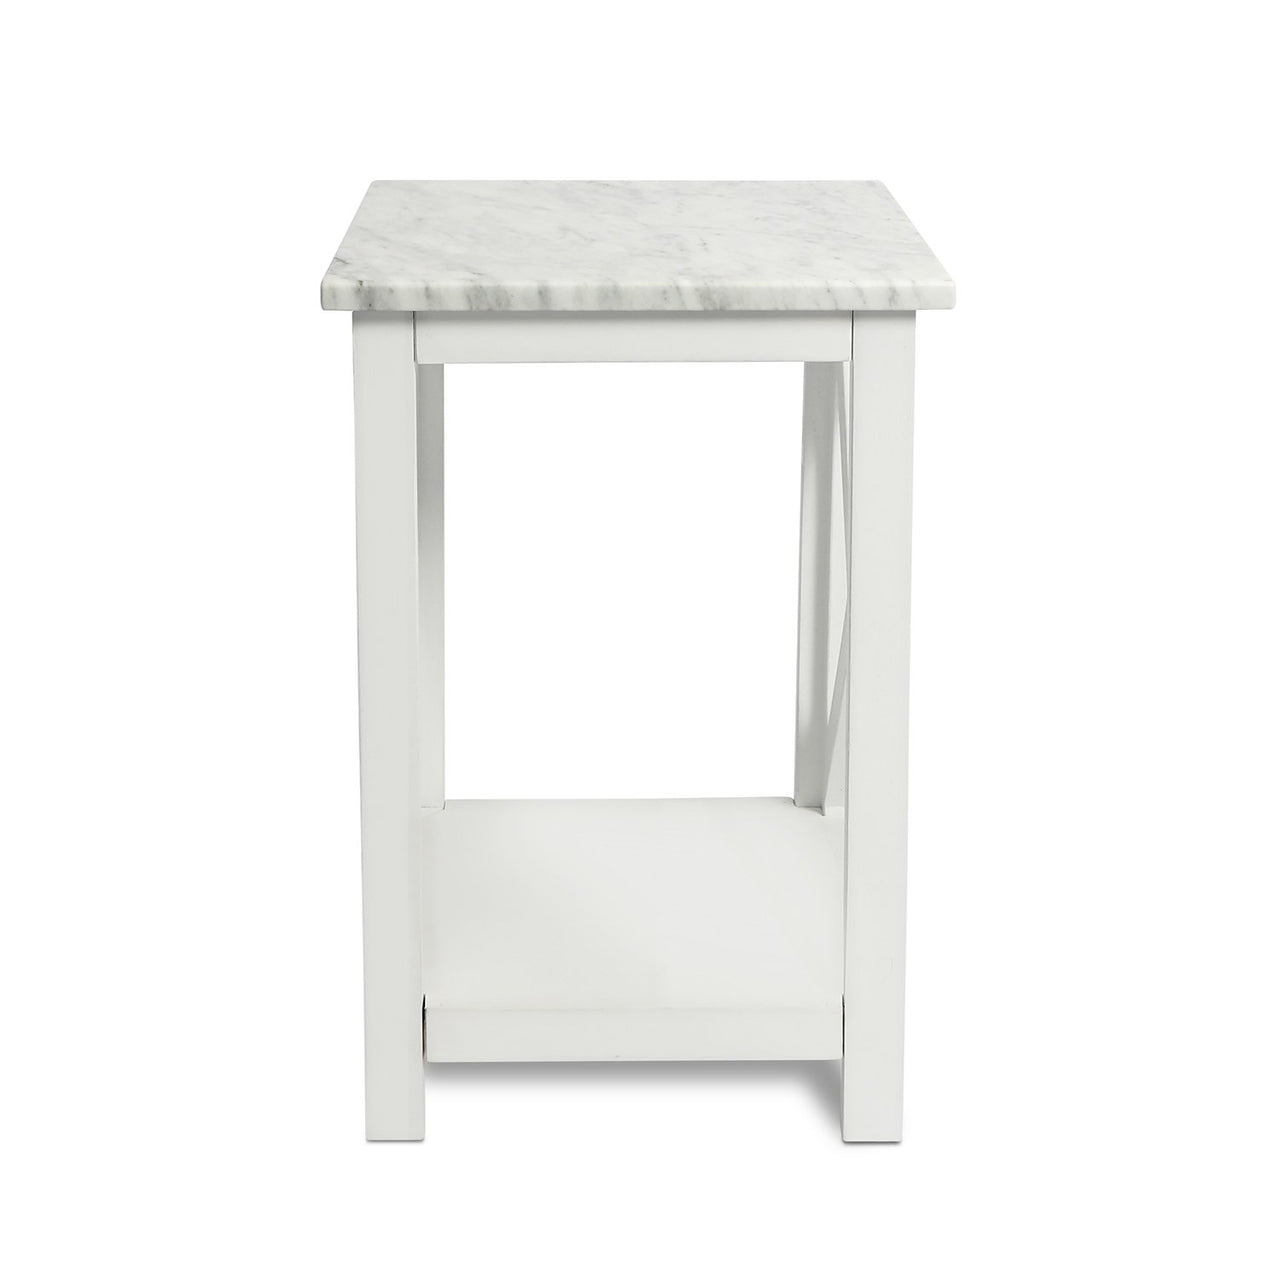 Agatha 15" Square Italian Carrara White Marble Side Table with Color Solid Wood Legs Writing Desk The Bianco Collection White 